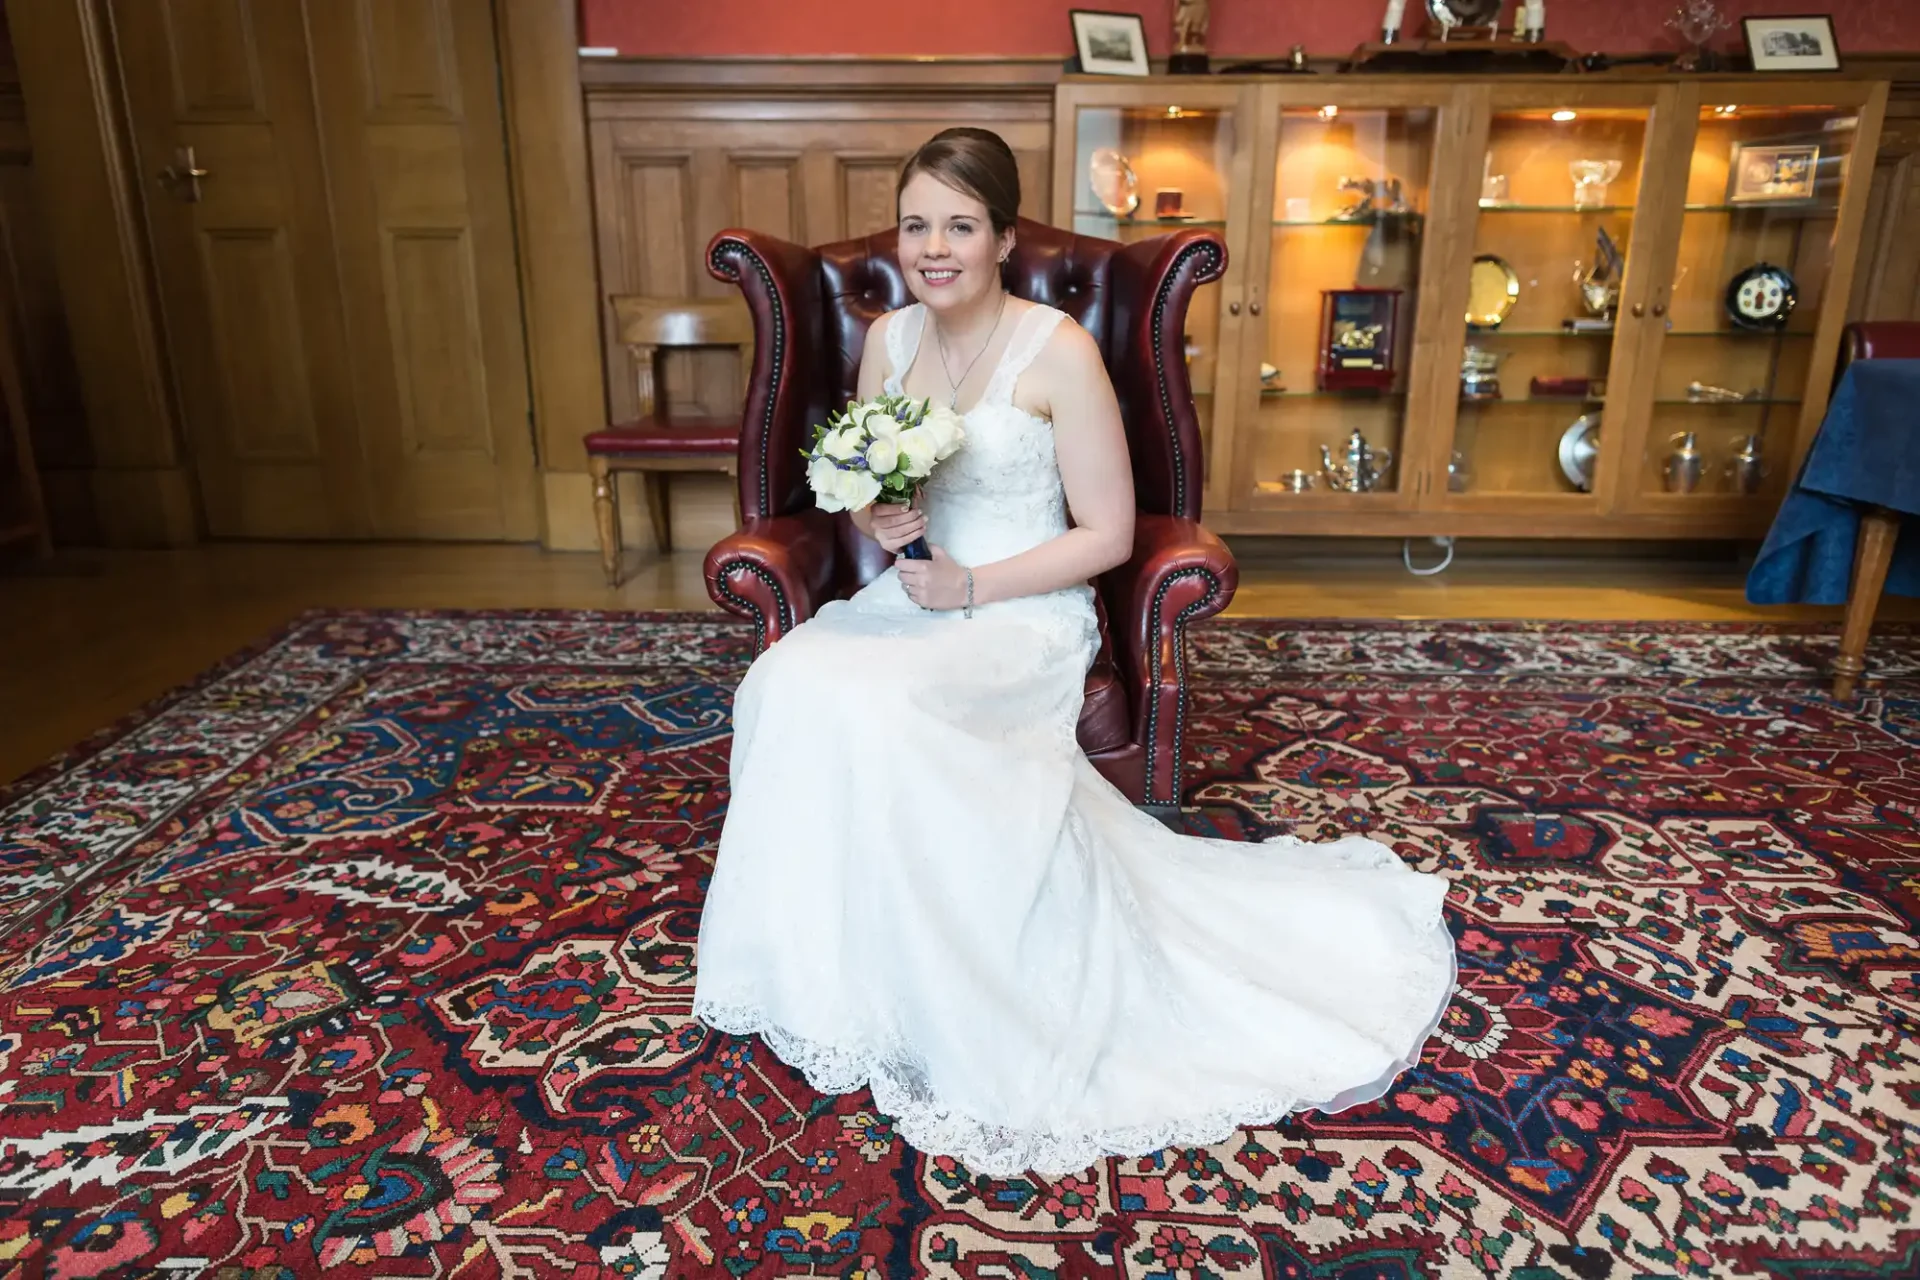 A bride in a white dress smiles while sitting in a red leather chair, holding a bouquet, with a cabinet and persian rug in the background.